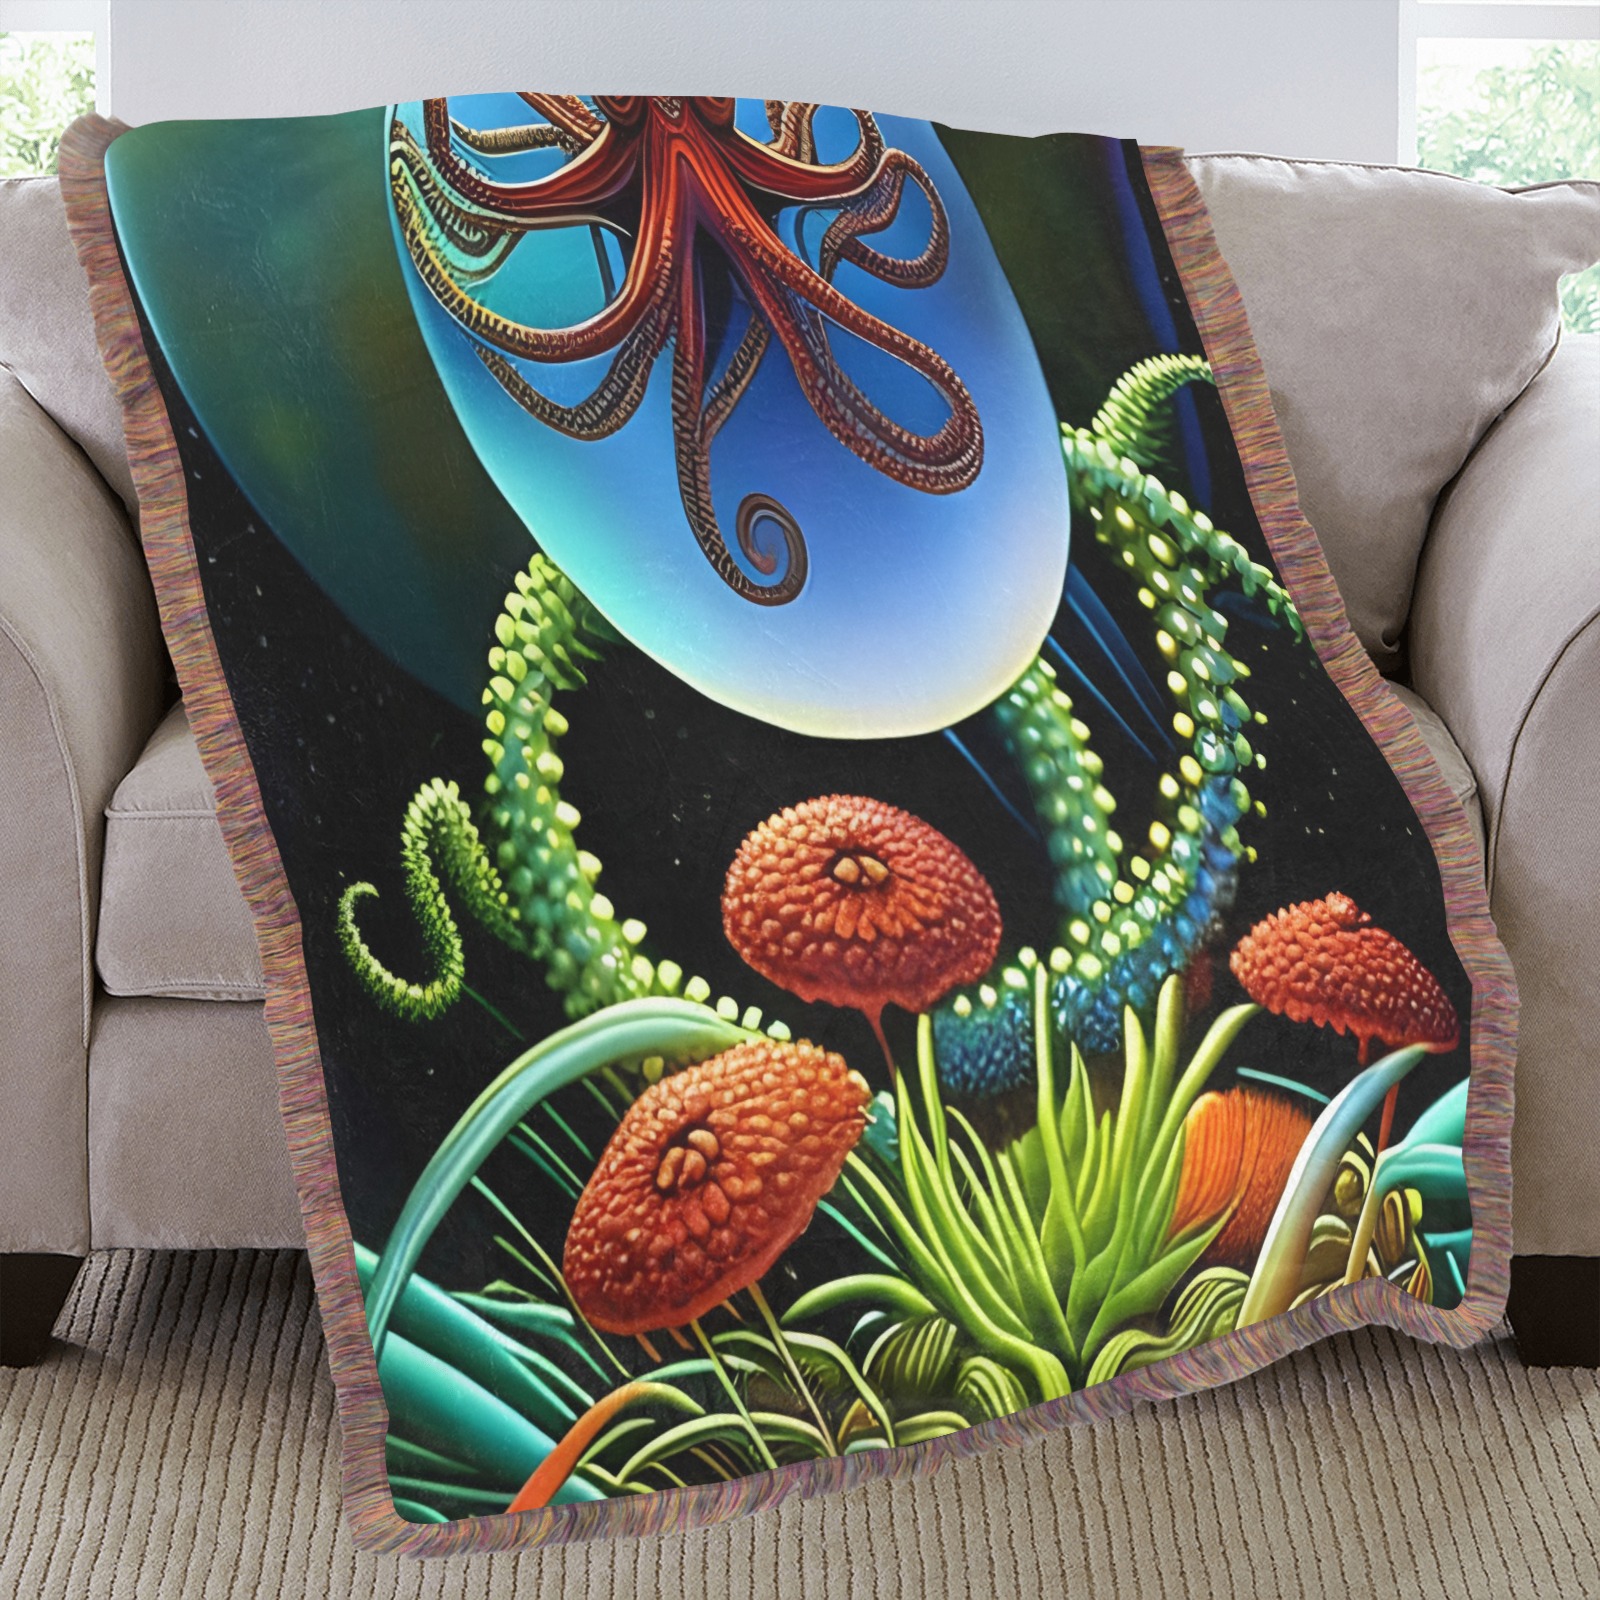 Out Of This World Spheres Octopus Ultra-Soft Fringe Blanket 50"x60" (Mixed Green)